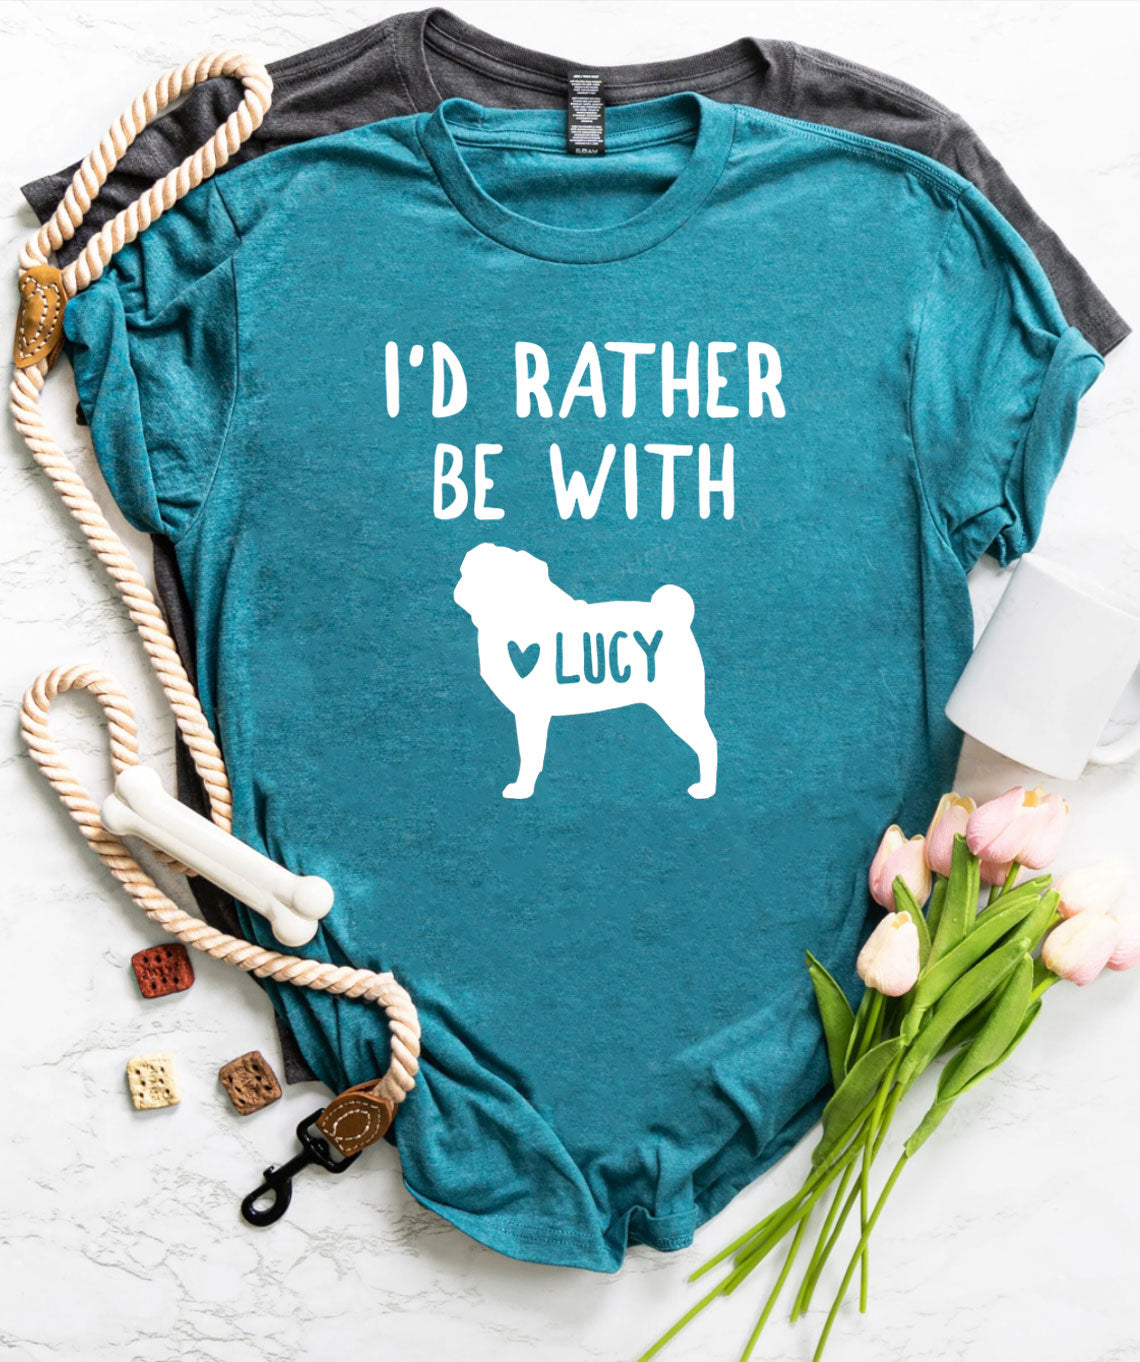 Personalized Pug Name Shirts I'd Rather Be With "Pug Name"